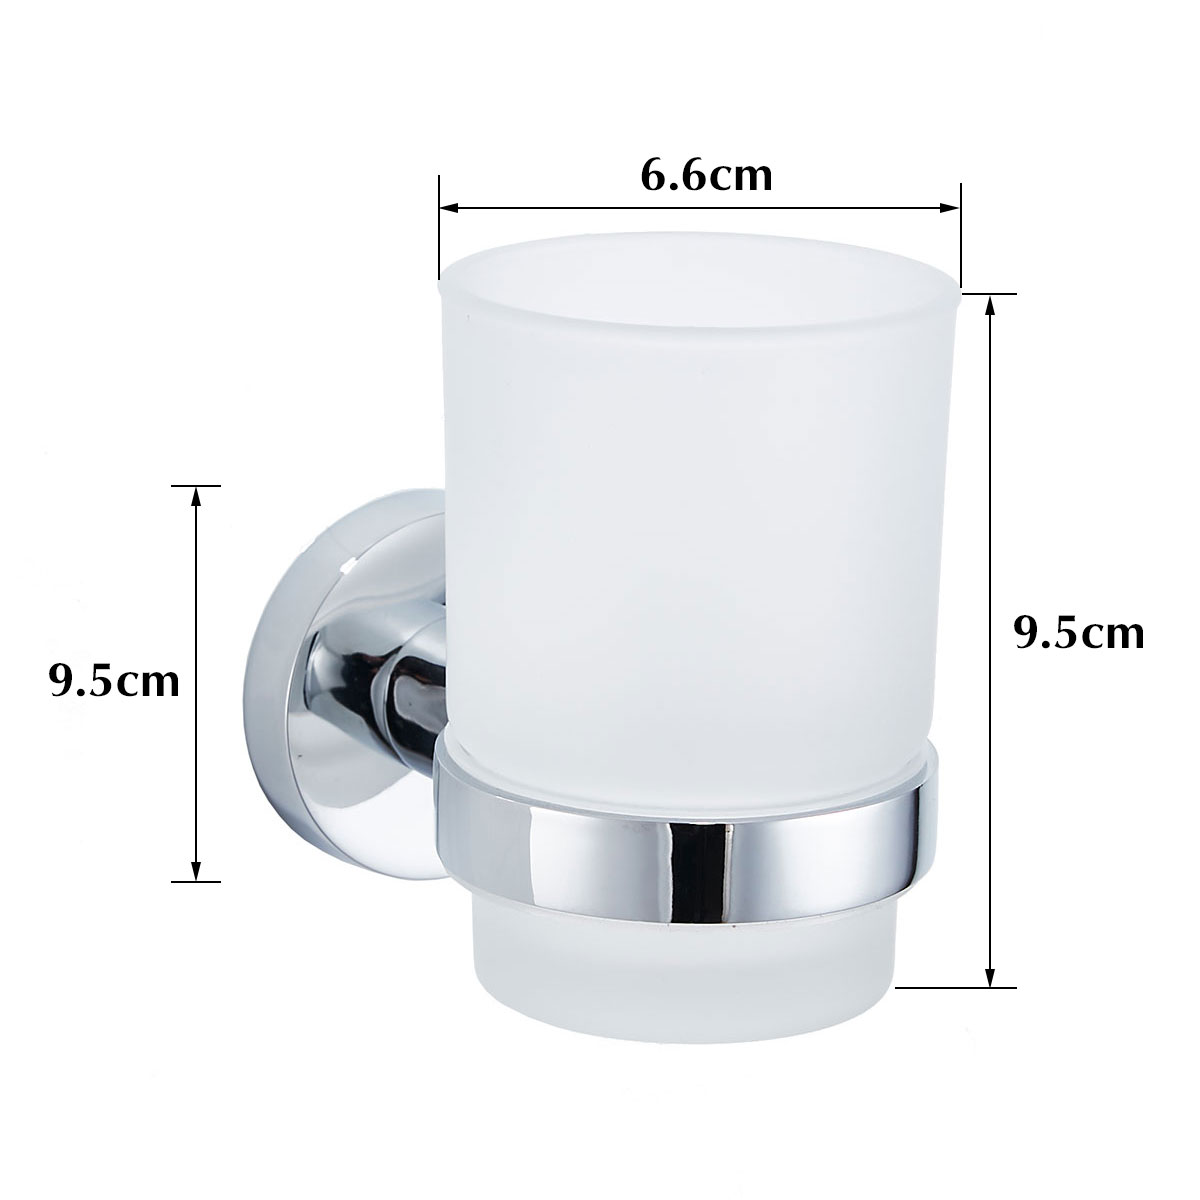 SingleDouble-Tumbler-Cup-Stainless-Steel-Toothbrush-Cup-Holder-Wall-Mounted-Toothbrush-Storage-for-B-1690420-10